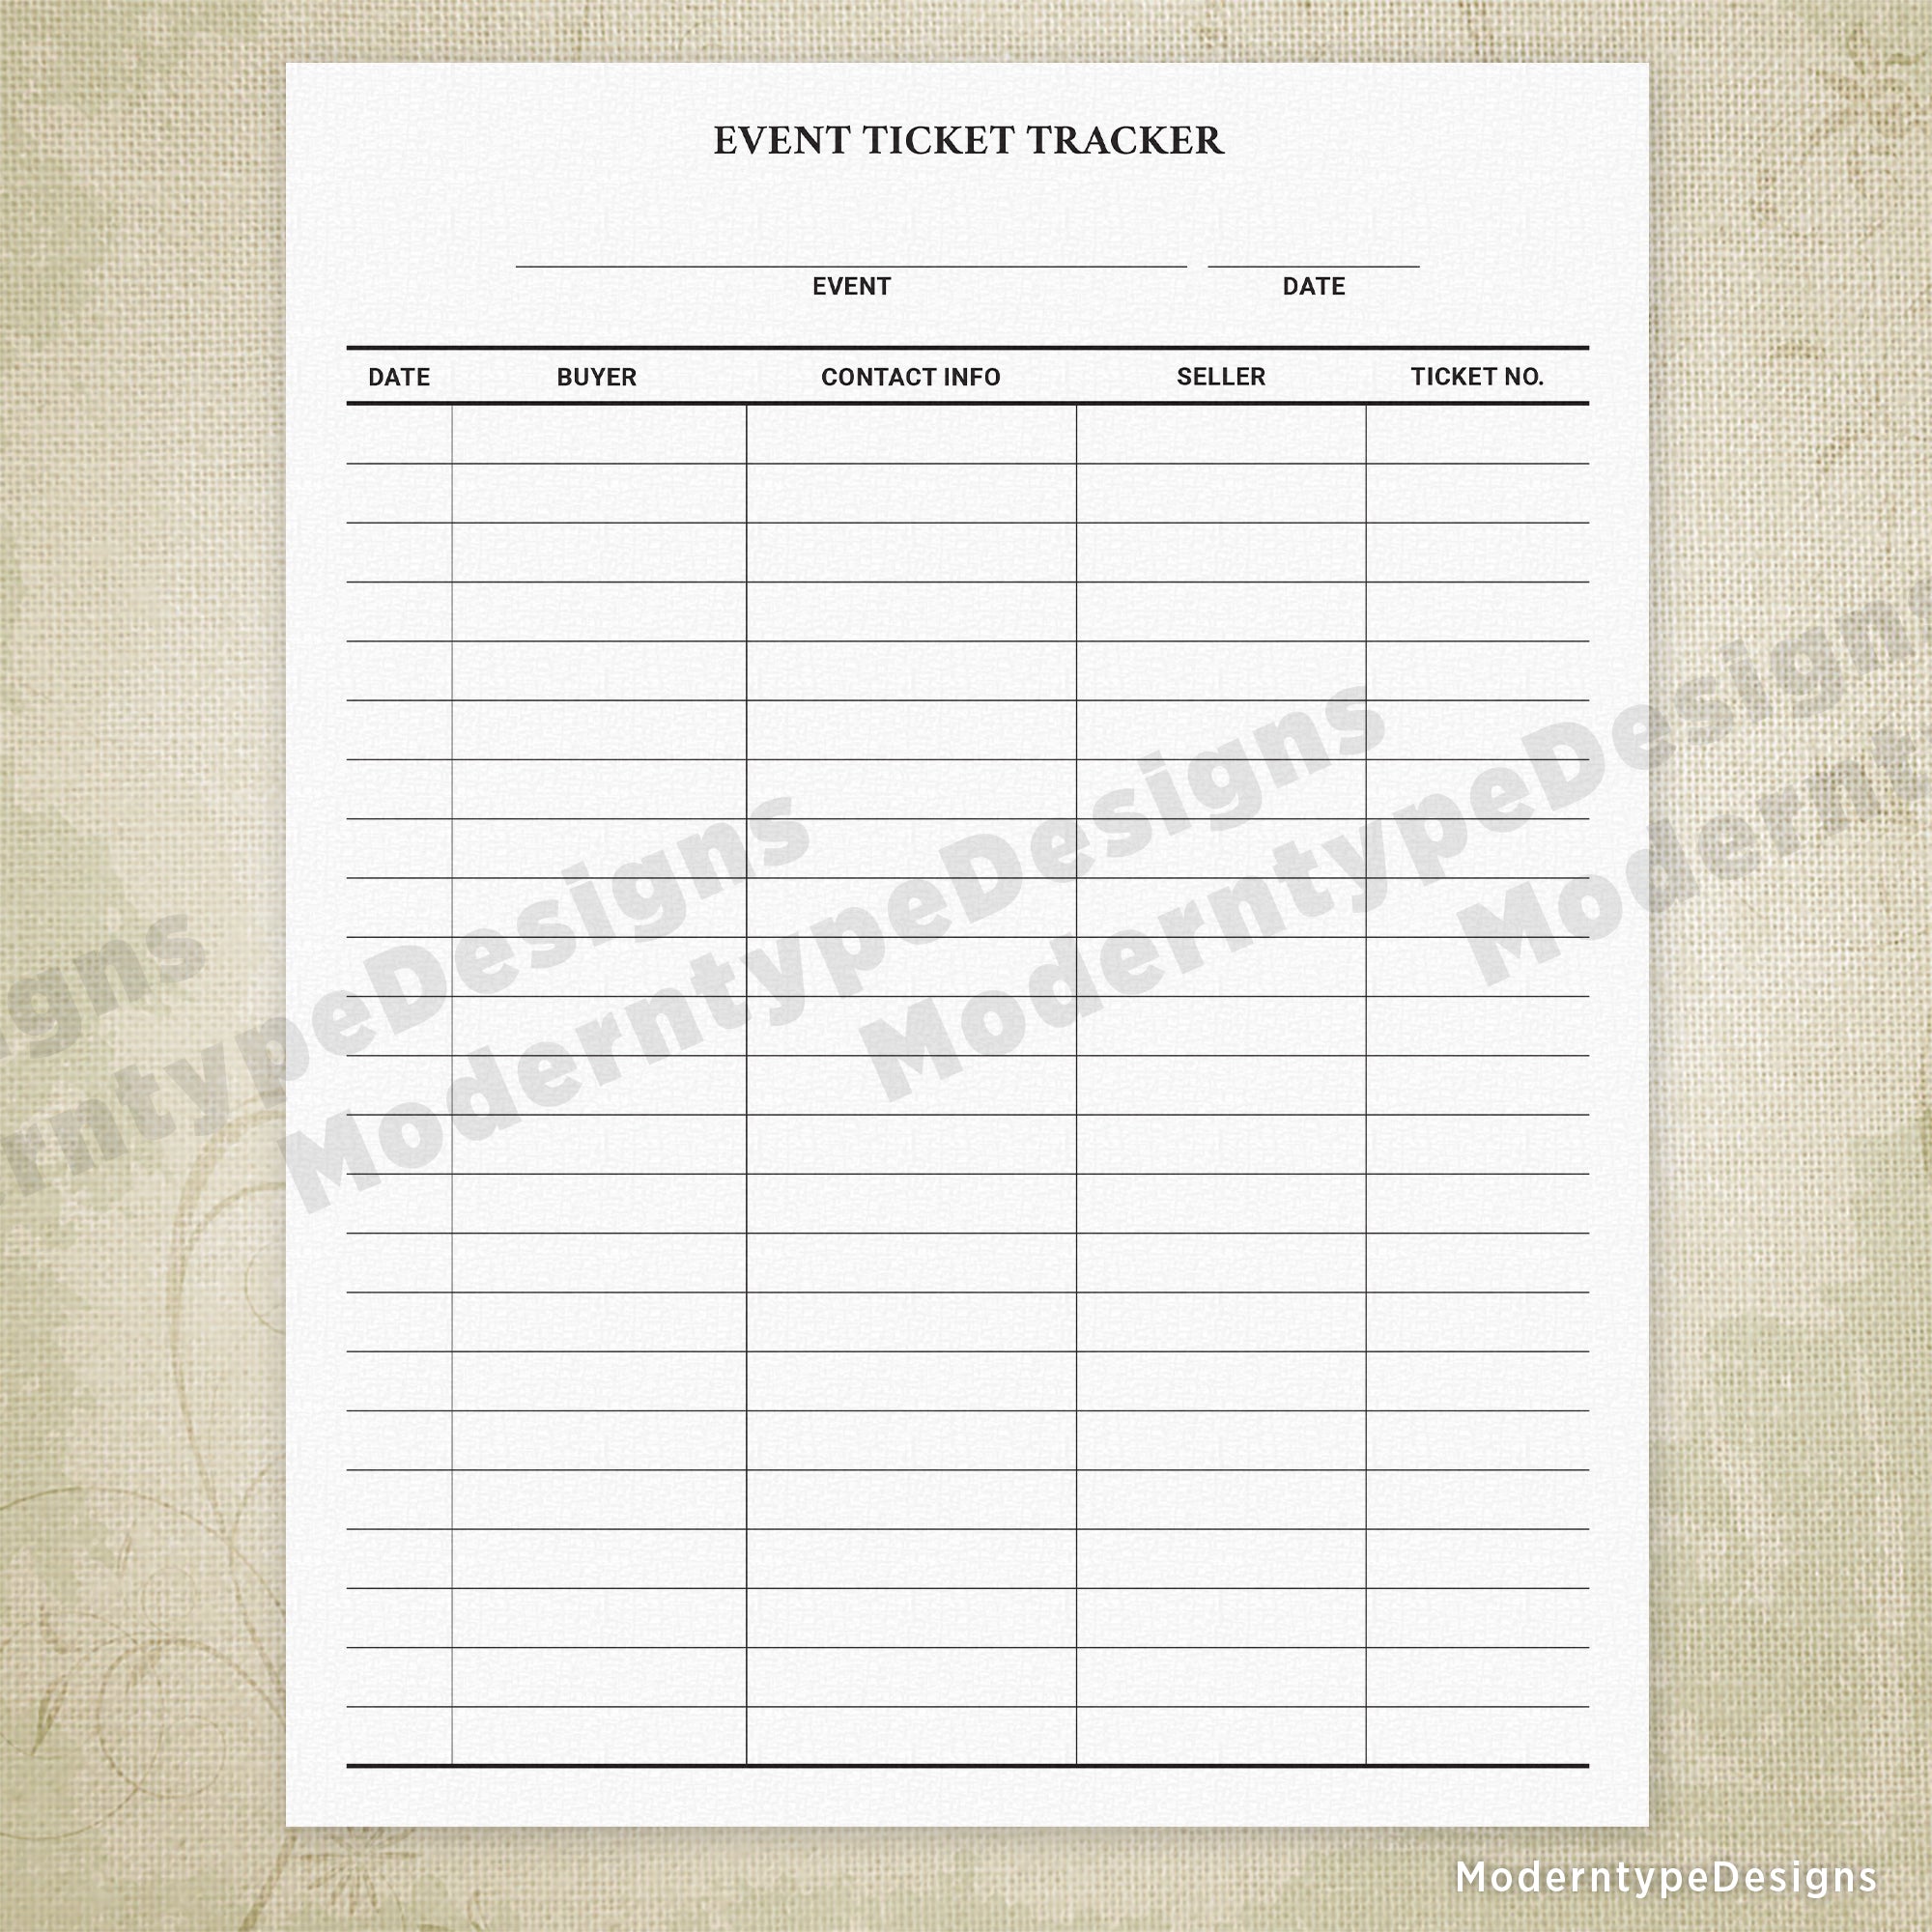 Event Ticket Tracker Printable Form